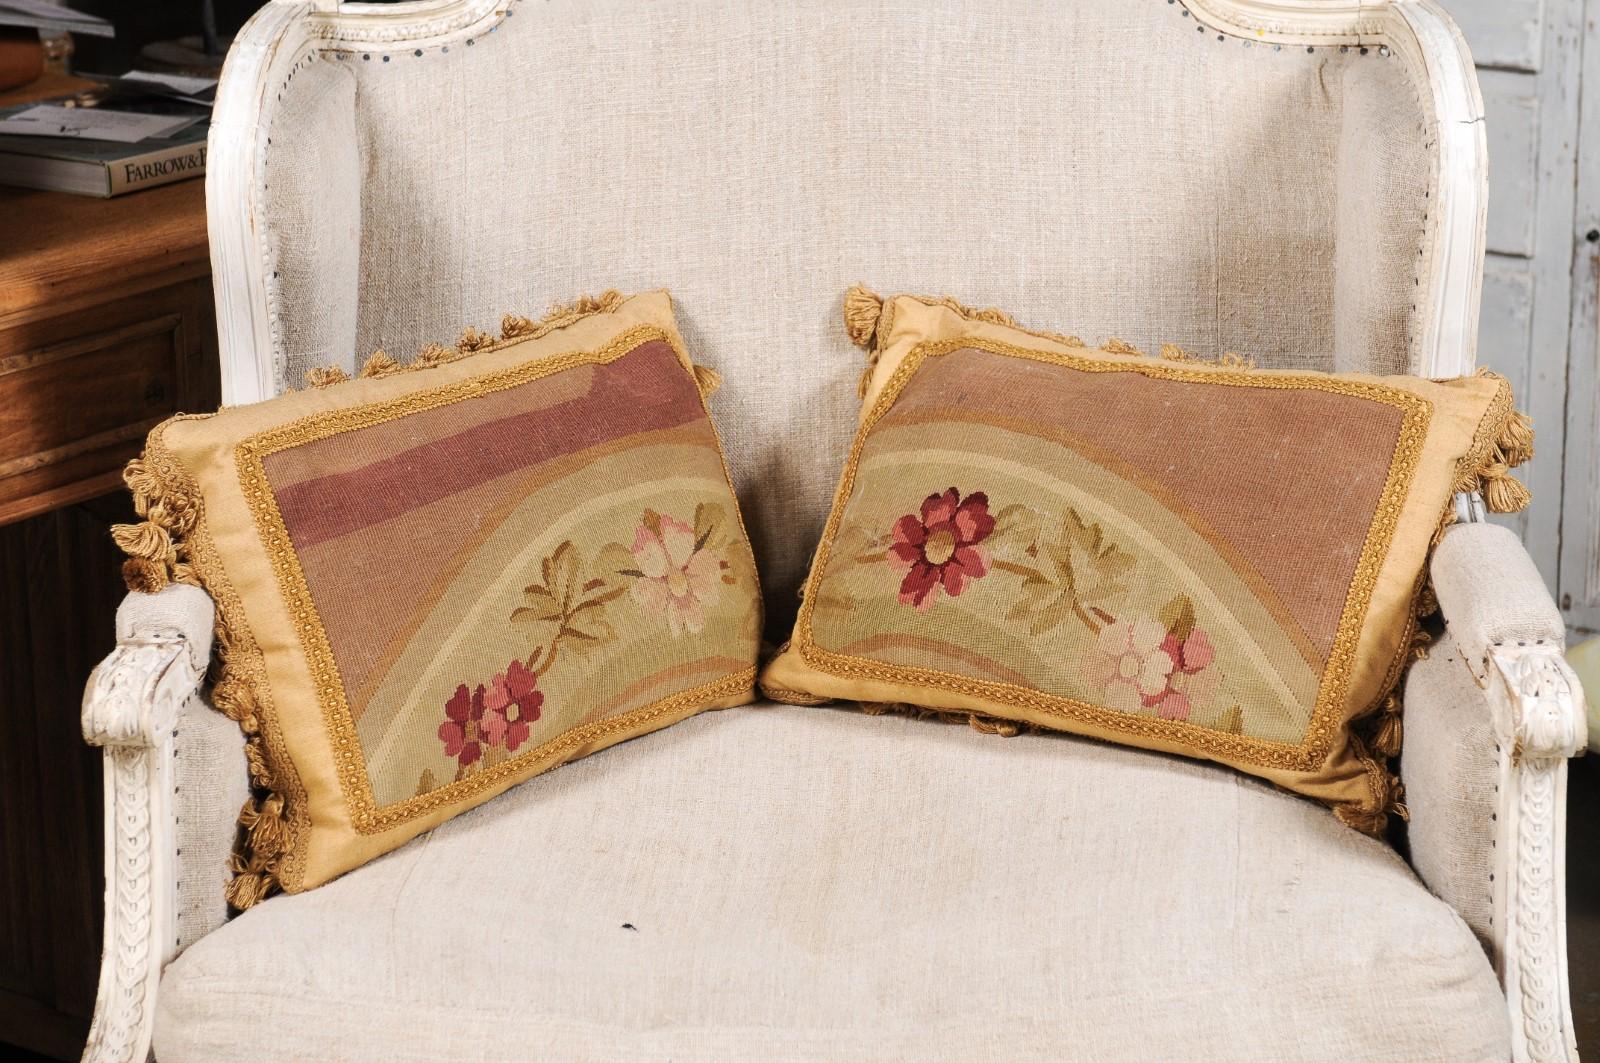 A pair of French Aubusson tapestry pillows from the 19th century, with floral décor and petite tassels. Created in the Aubusson tapestry manufacture located in central France during the 19th century, each of this pair of horizontal pillows features